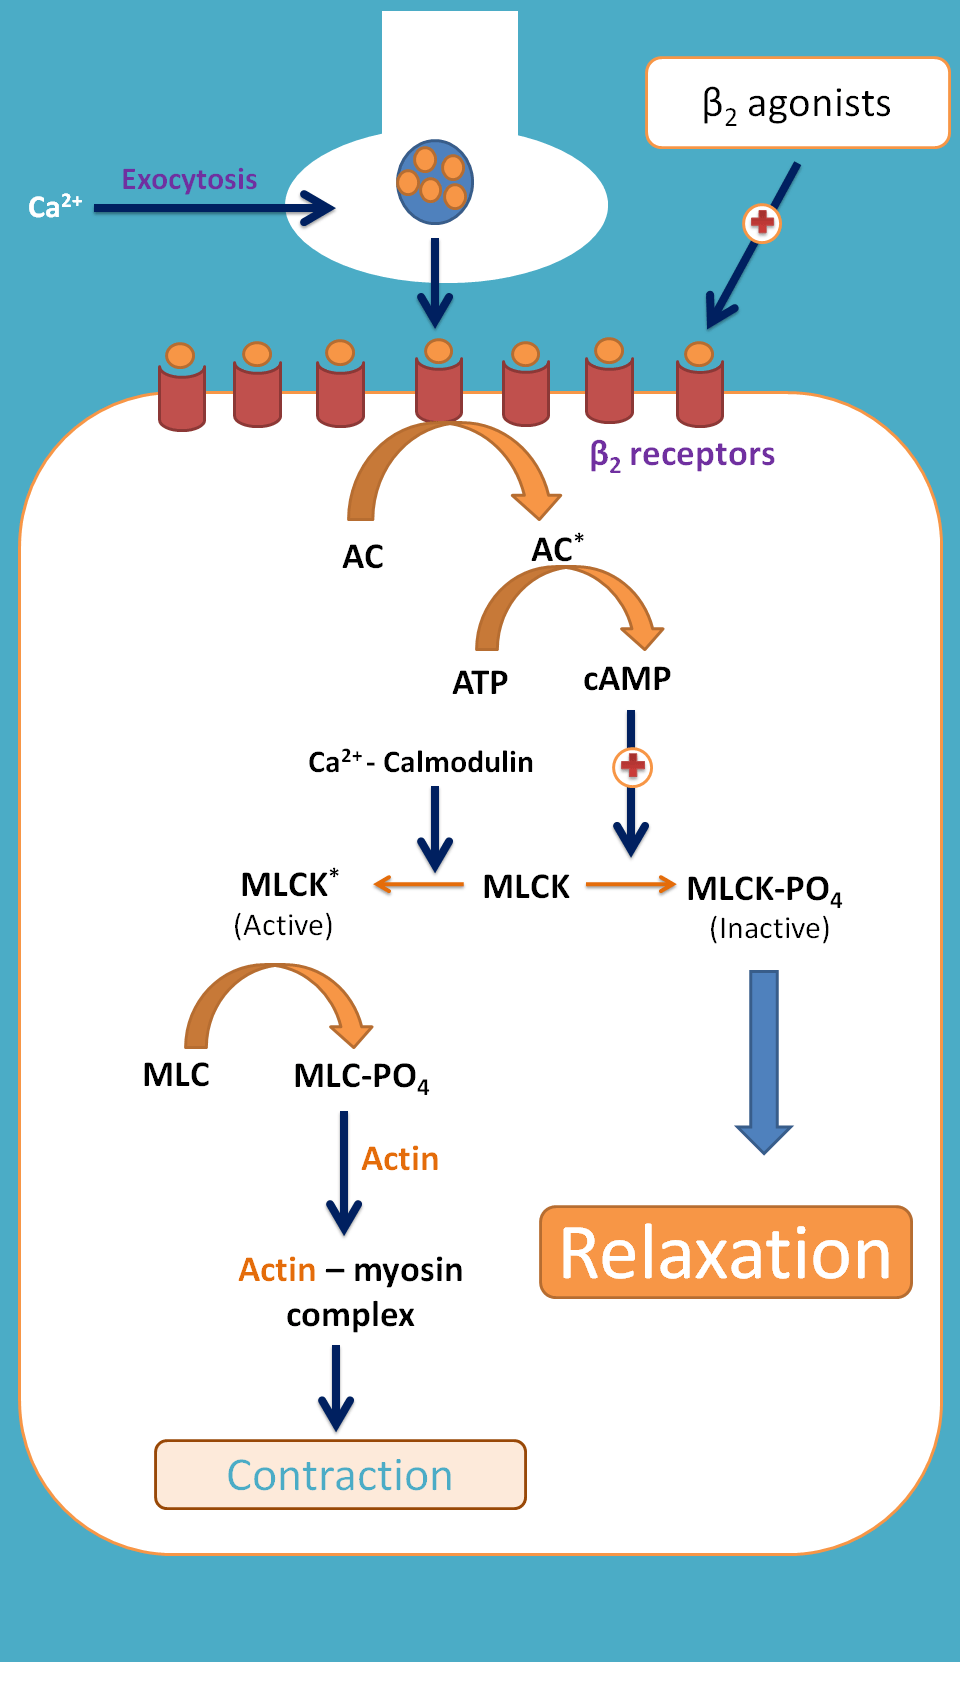 beta2 agonists producing relaxation